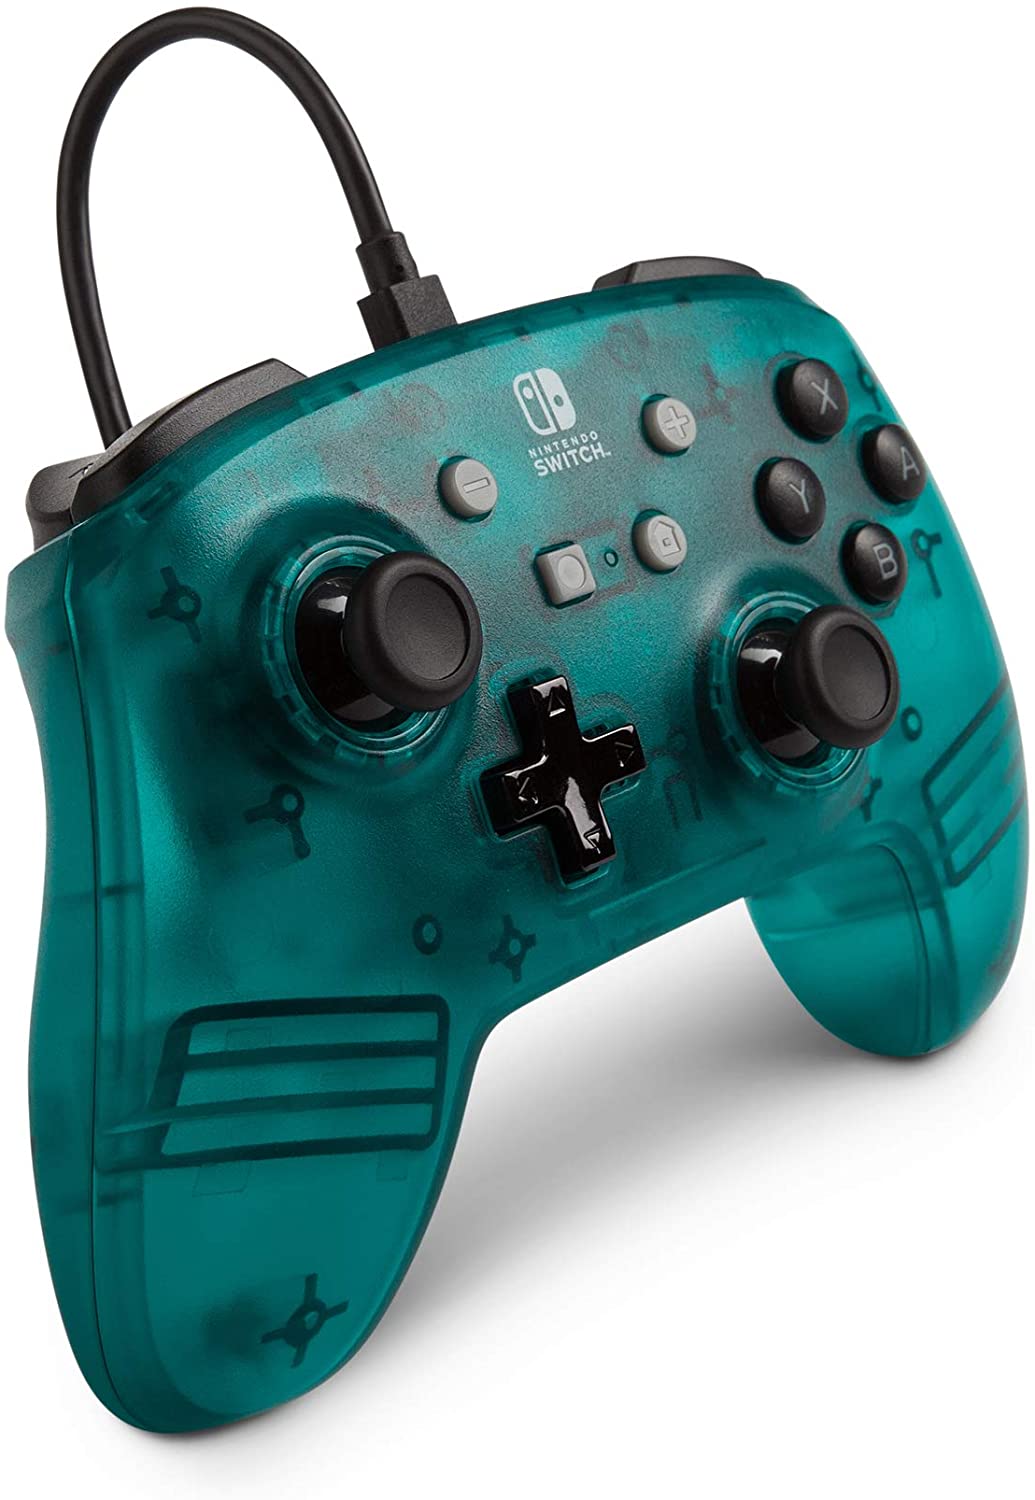 PowerA Wired Controller For Nintendo Switch - Teal Frost - Level UpPowerA617885021299